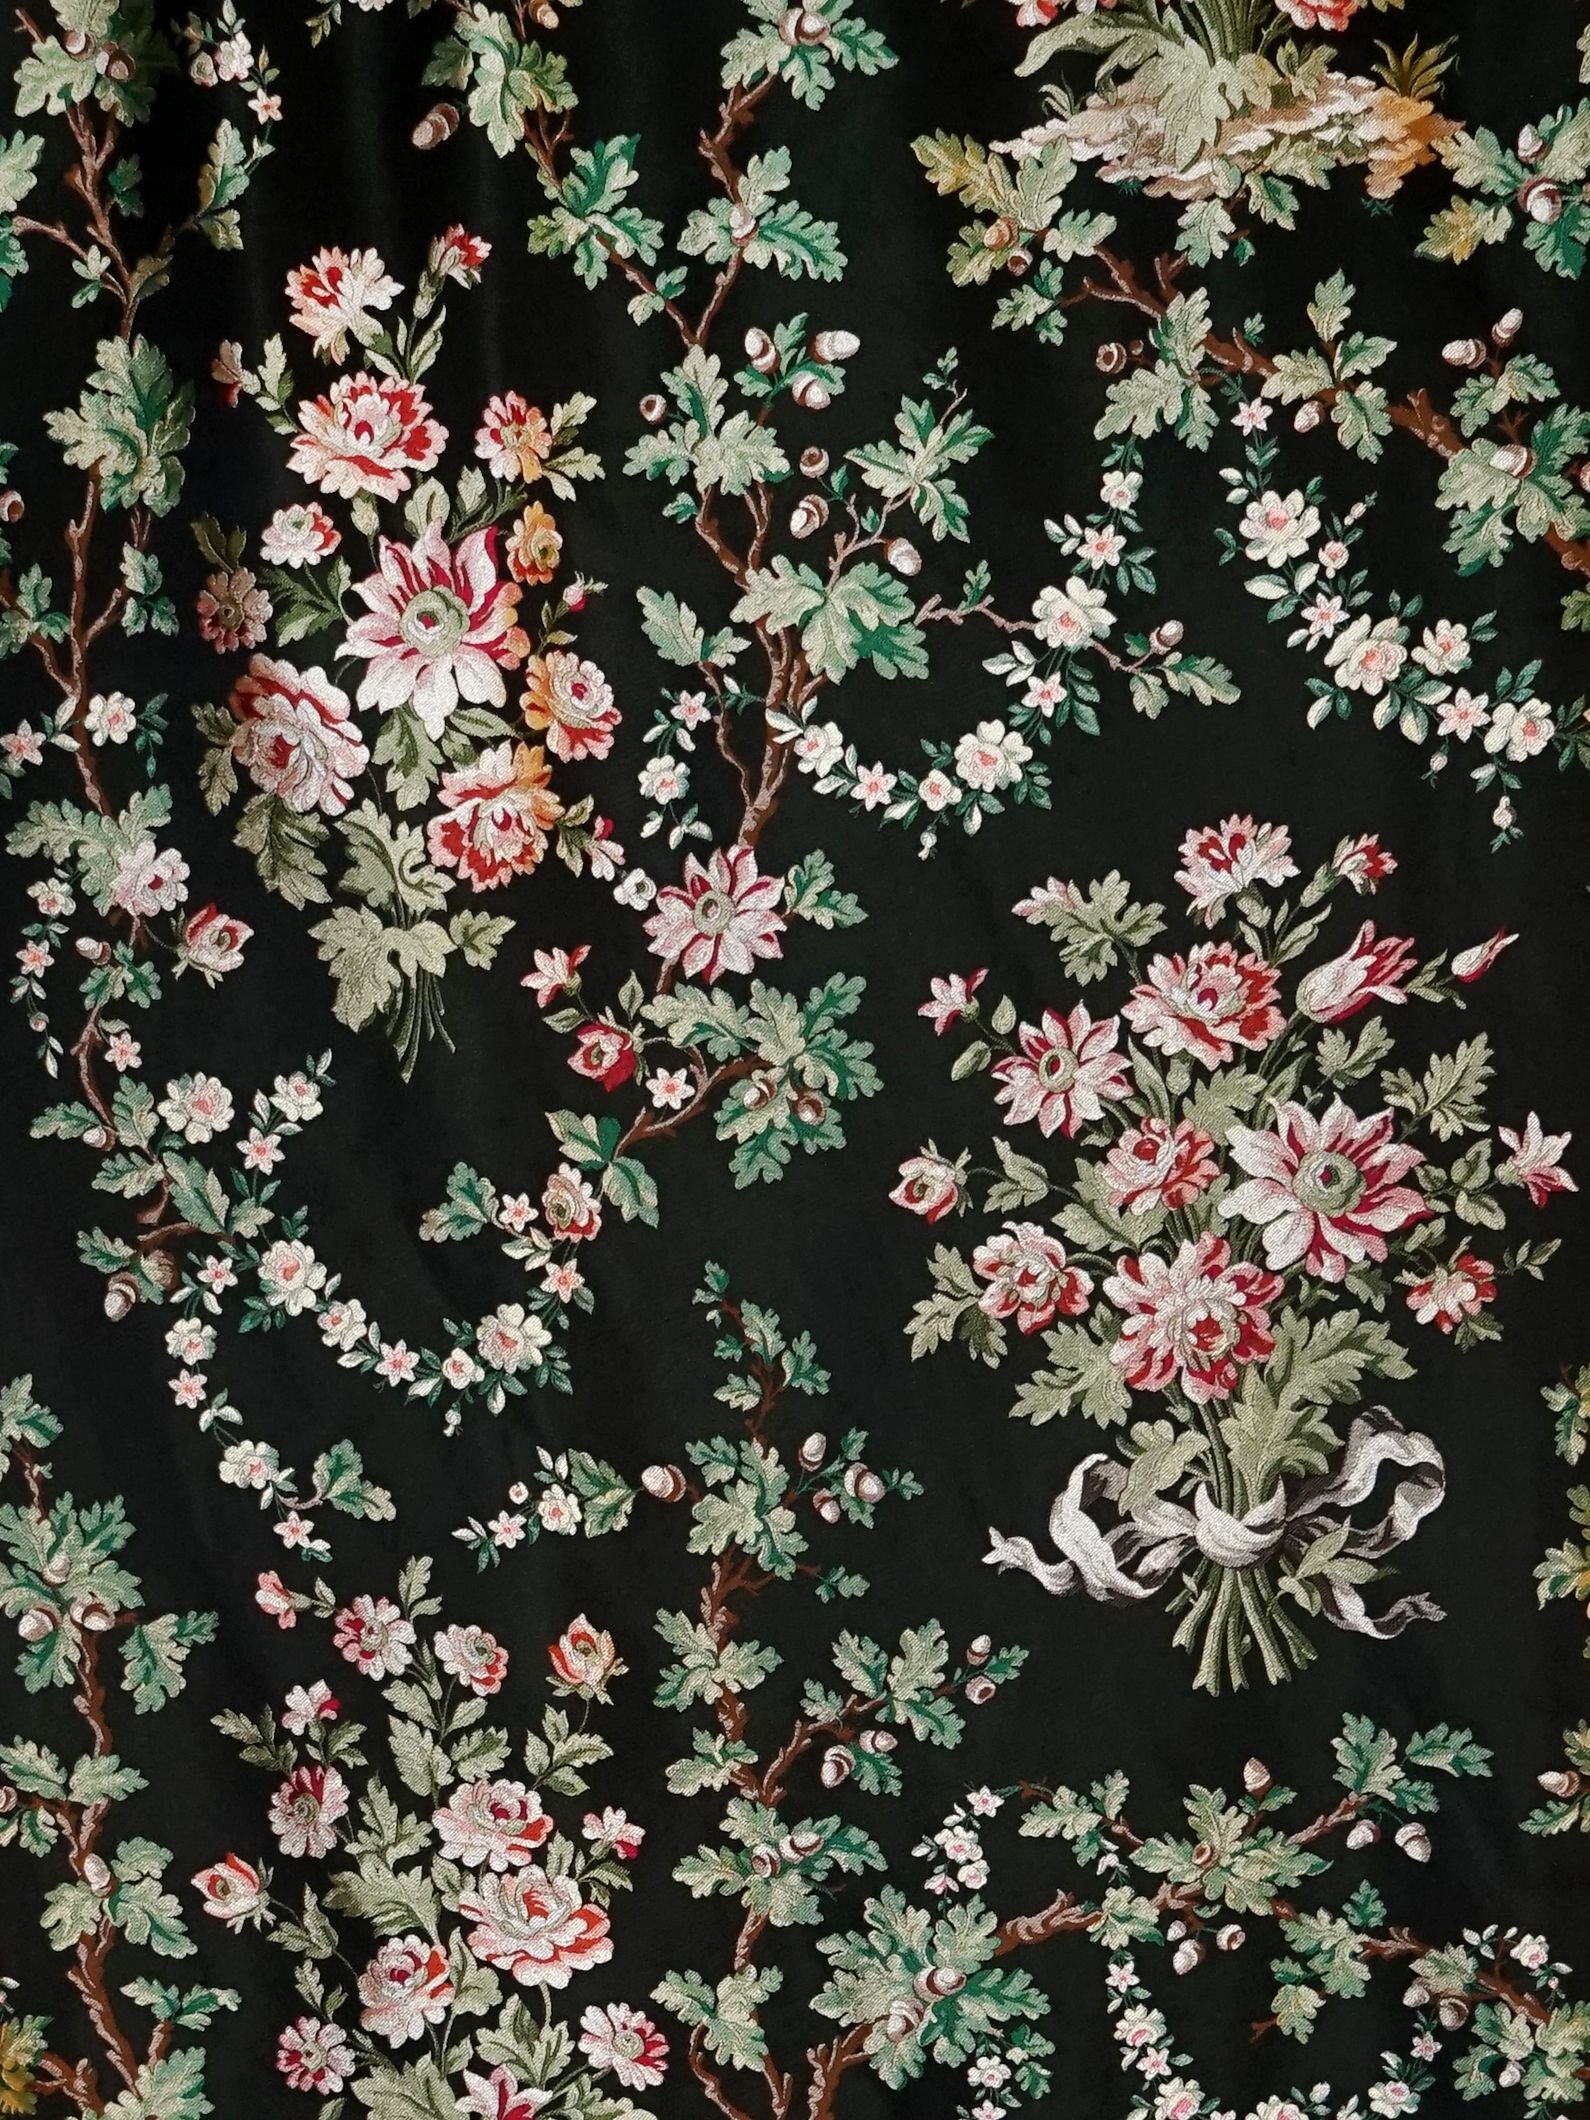 La Belle Jardiniere fabric in black cerise color - pattern number SB 00142866 - by Scalamandre in the Old World Weavers collection